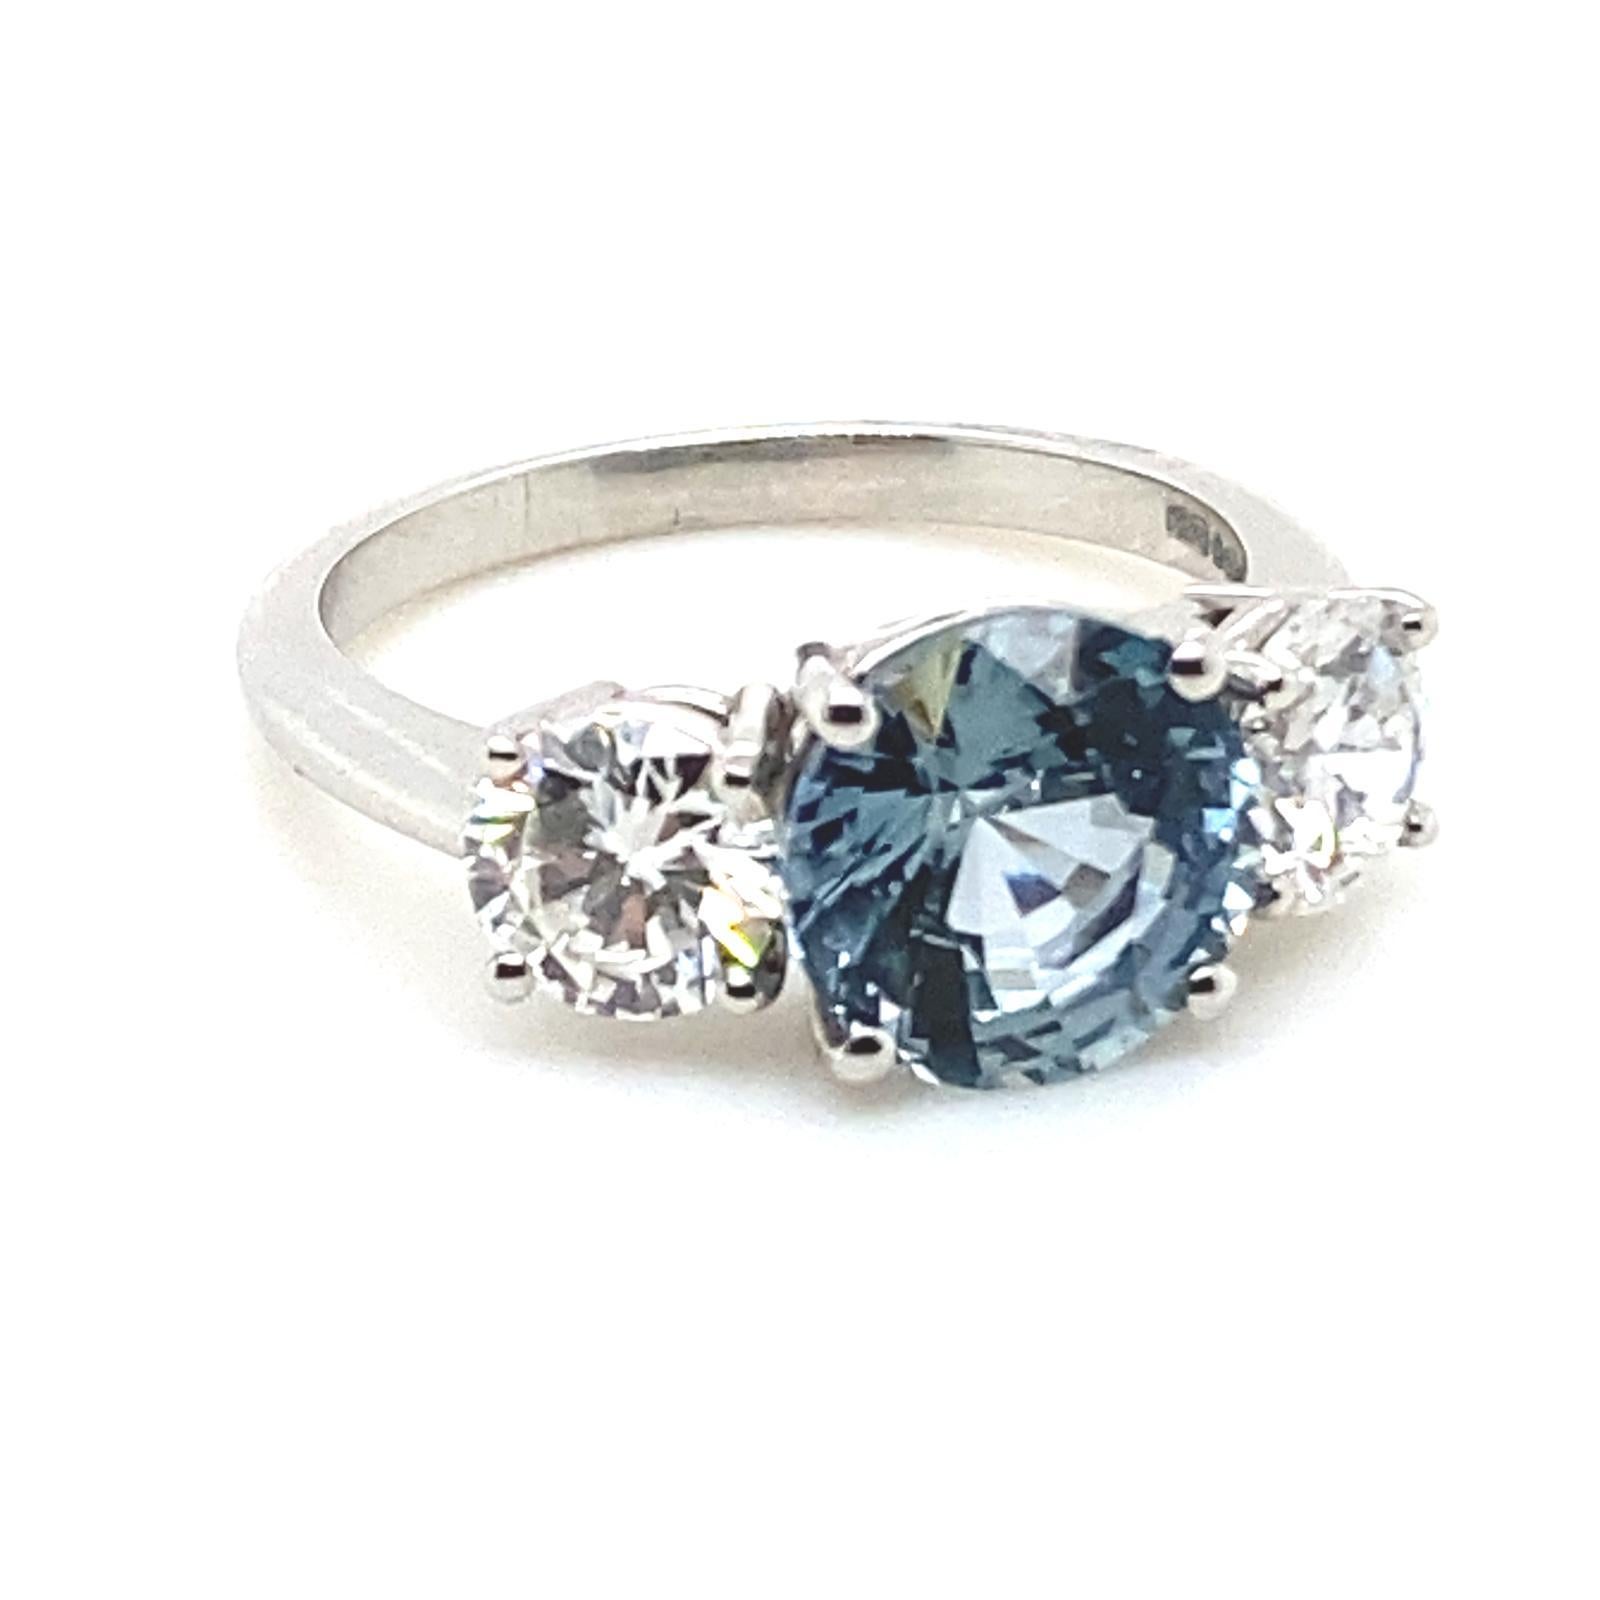 A 3.10 carat sapphire and diamond three stone platinum engagement ring.

This beautiful sapphire and diamond ring is handcrafted in platinum.

Claw set to its centre with a 3.10 carat round cut sapphire of unusual aquamarine colour and framed on